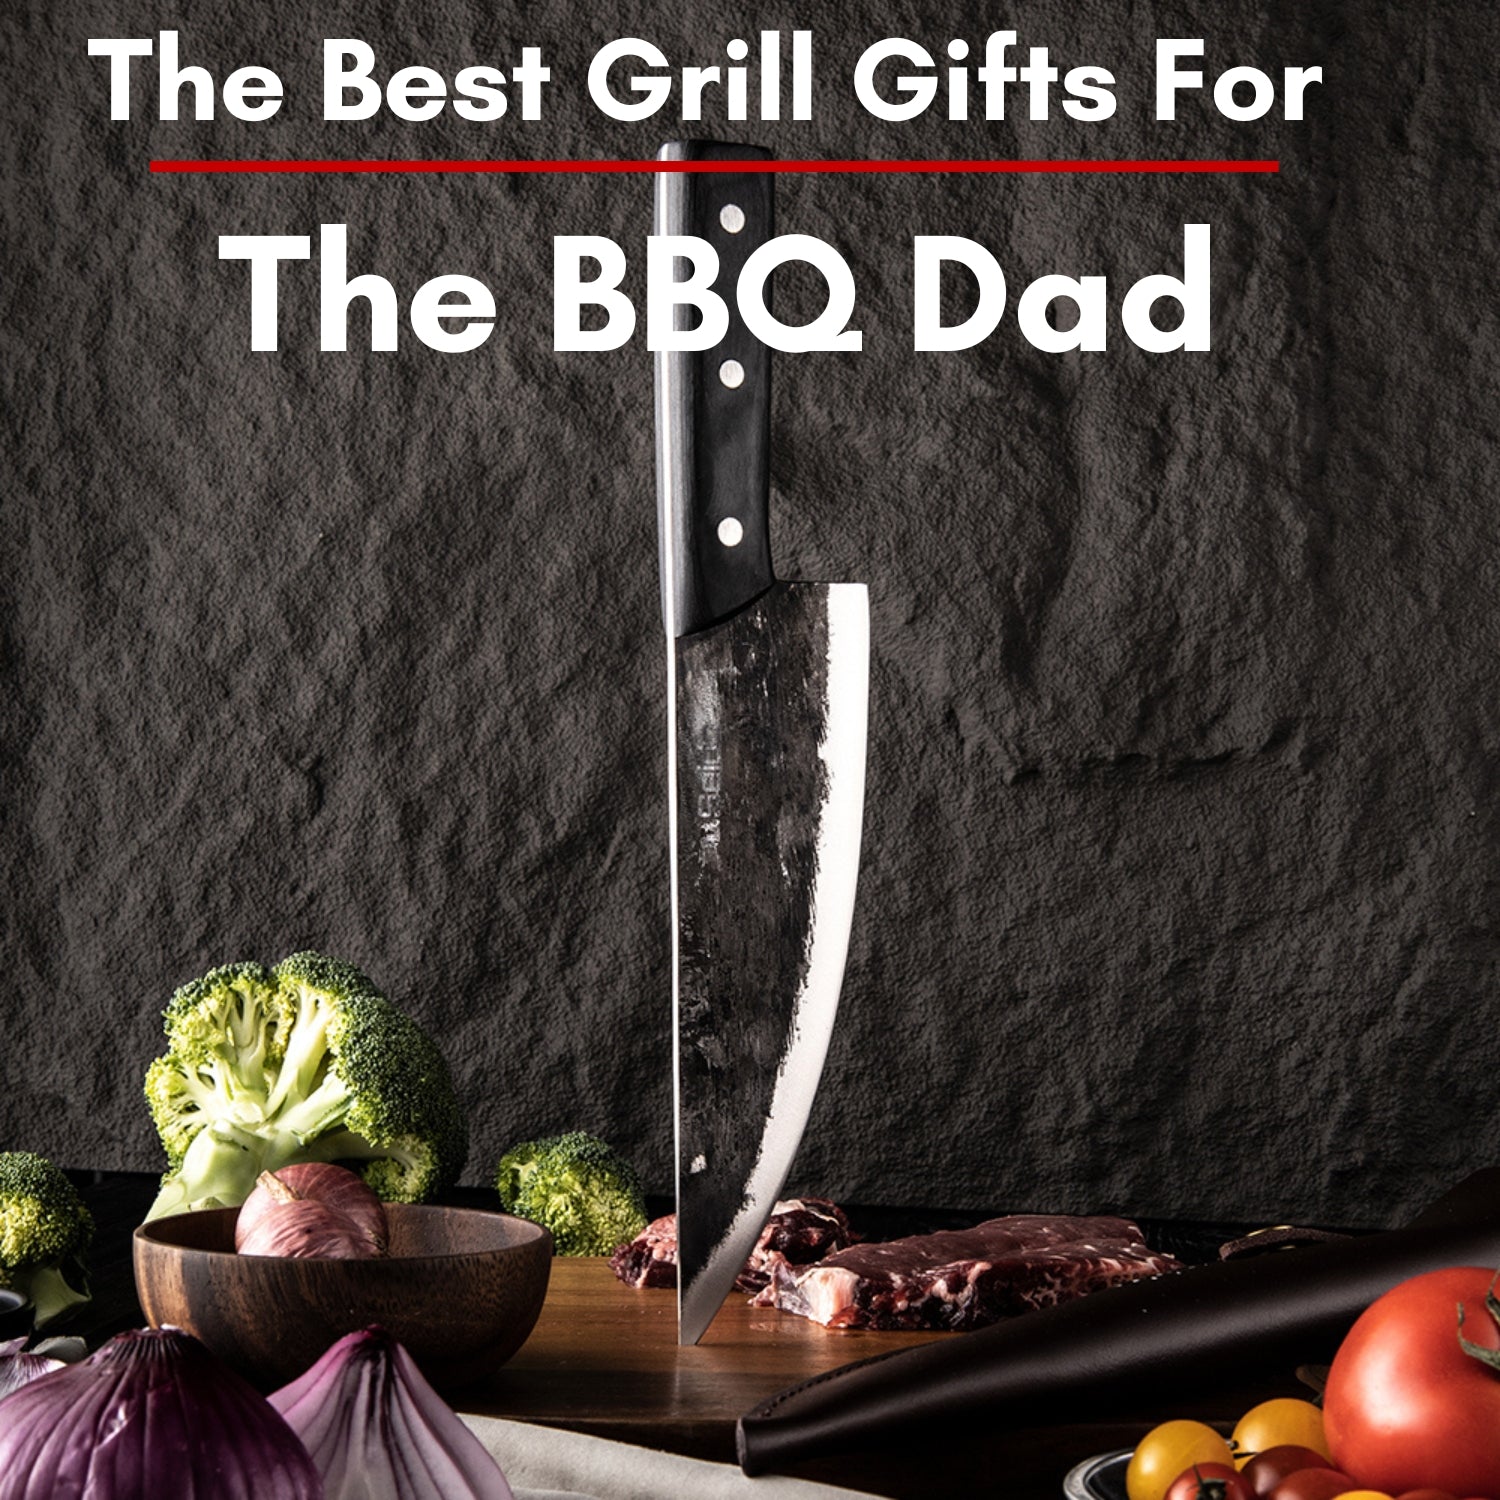 The Best Grill Gifts for The BBQ Dad: Father's Day Grilling Gifts